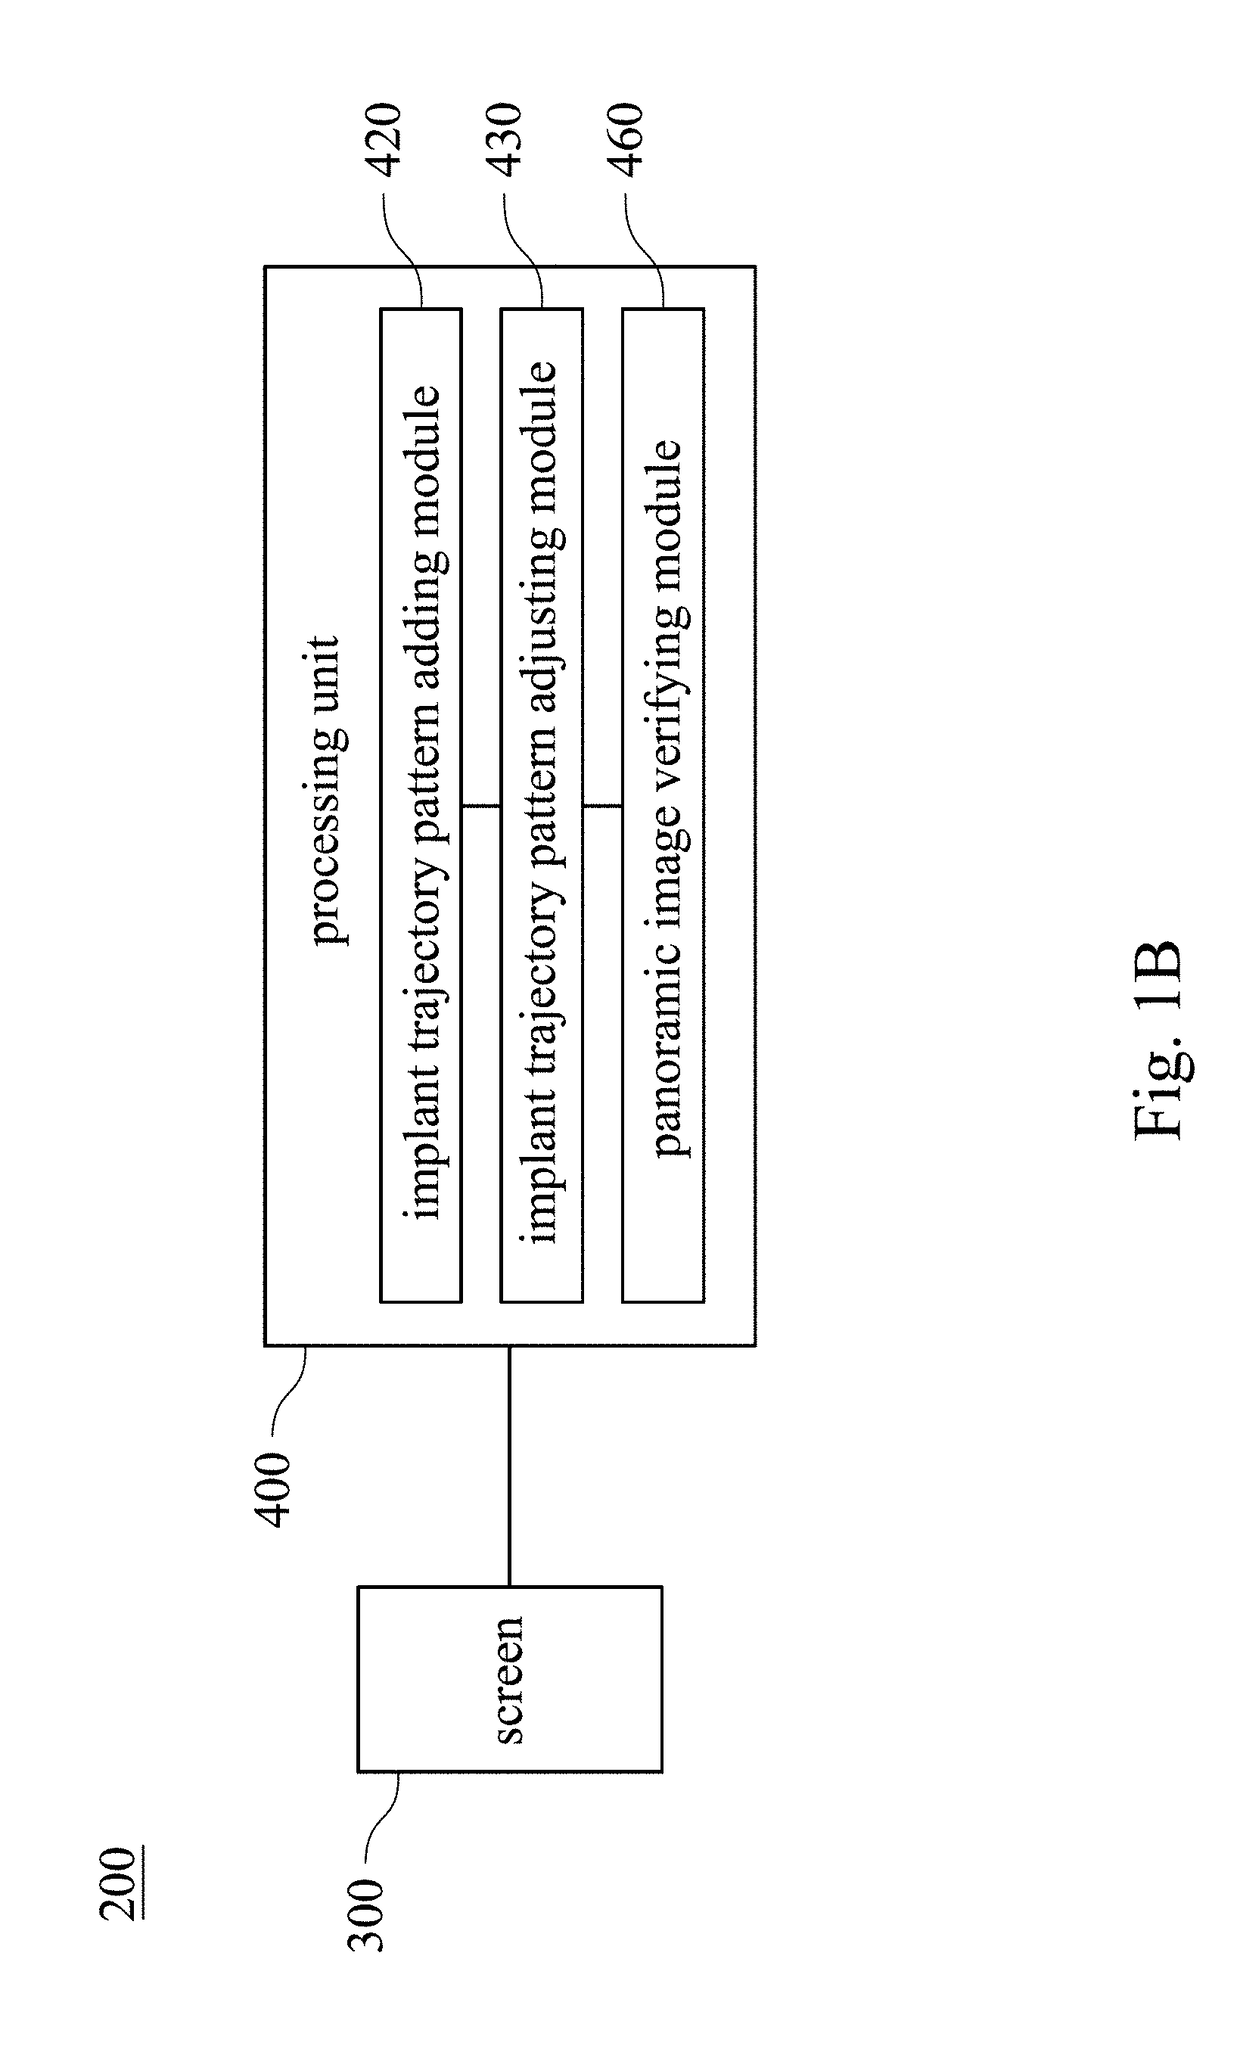 Method and system for verifying panoramic images of implants